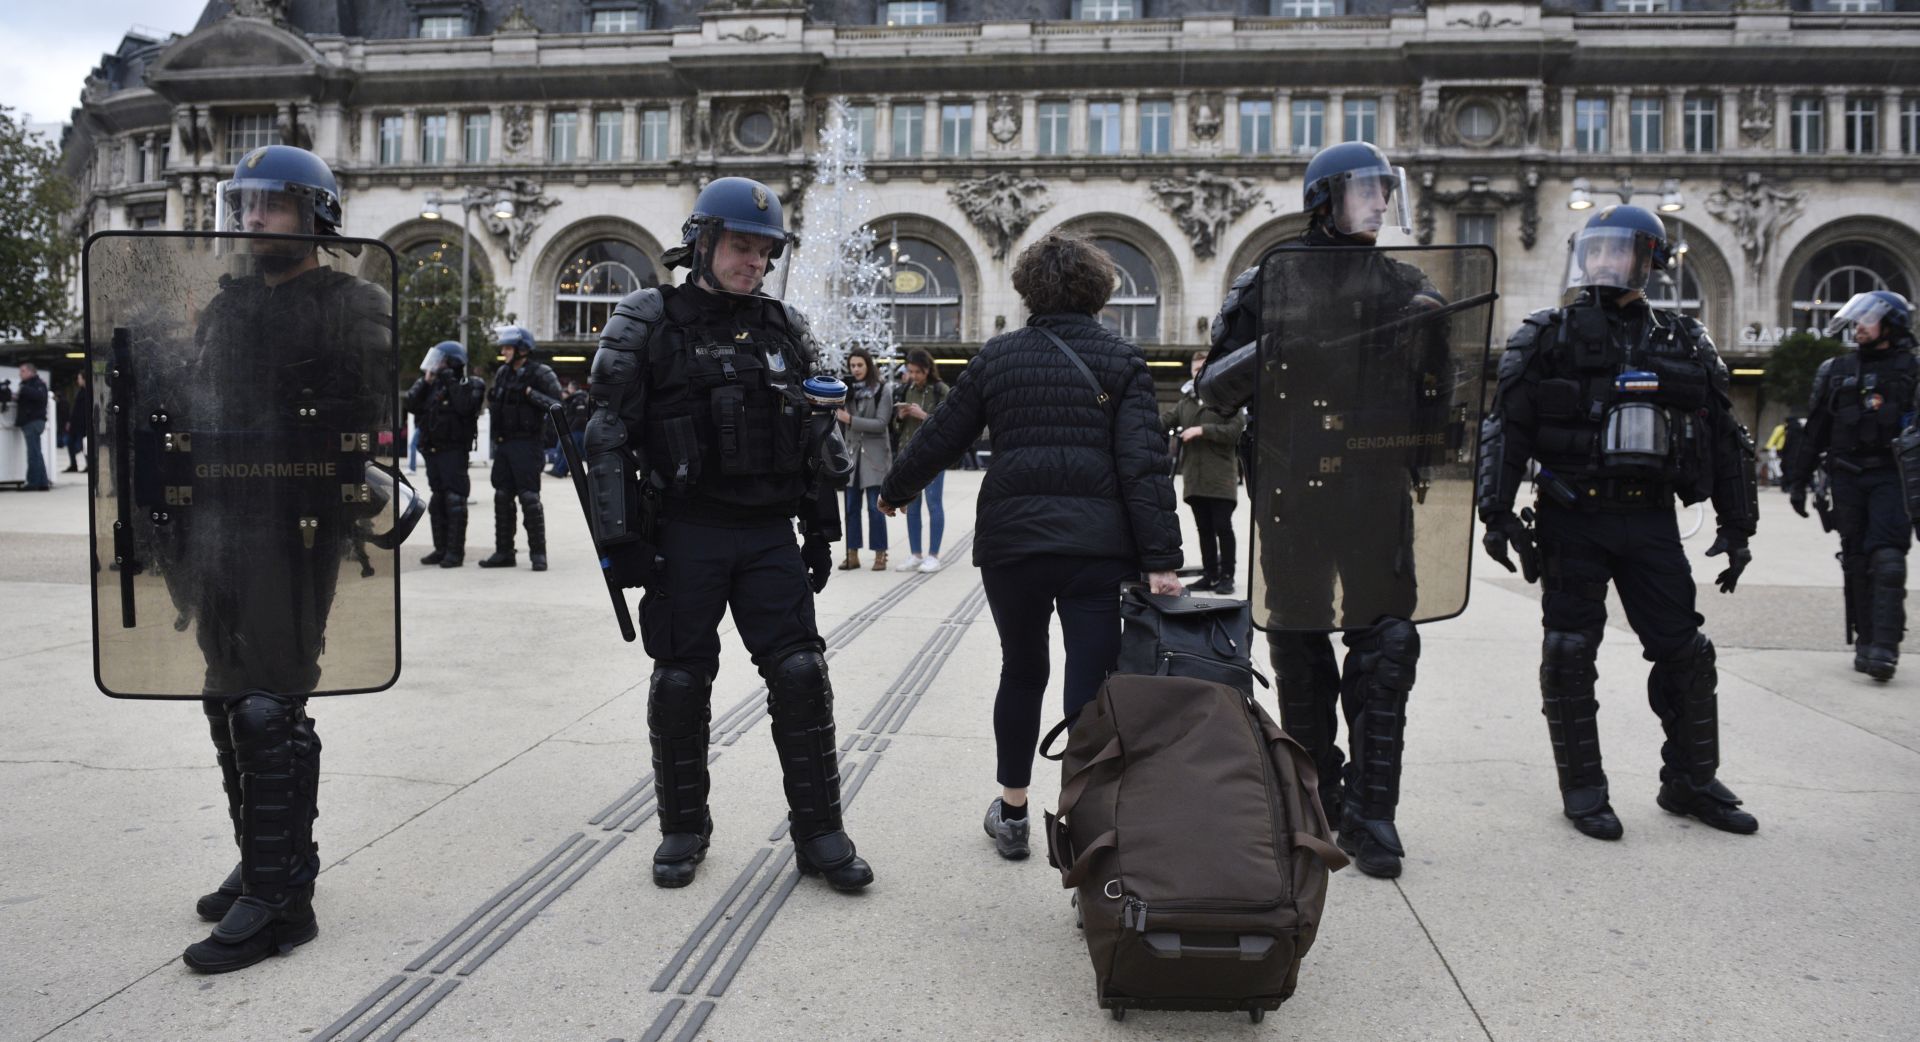 epa08088258 French riot police help travelers during a demonstration against pension reforms on the Gare de Lyon train station in Paris, France, 23 December 2019. Unions representing railway and transport workers and many others in the public sector have called for a general strike and demonstration to protest against French government's reform of the pension system.  EPA/Julien de Rosa